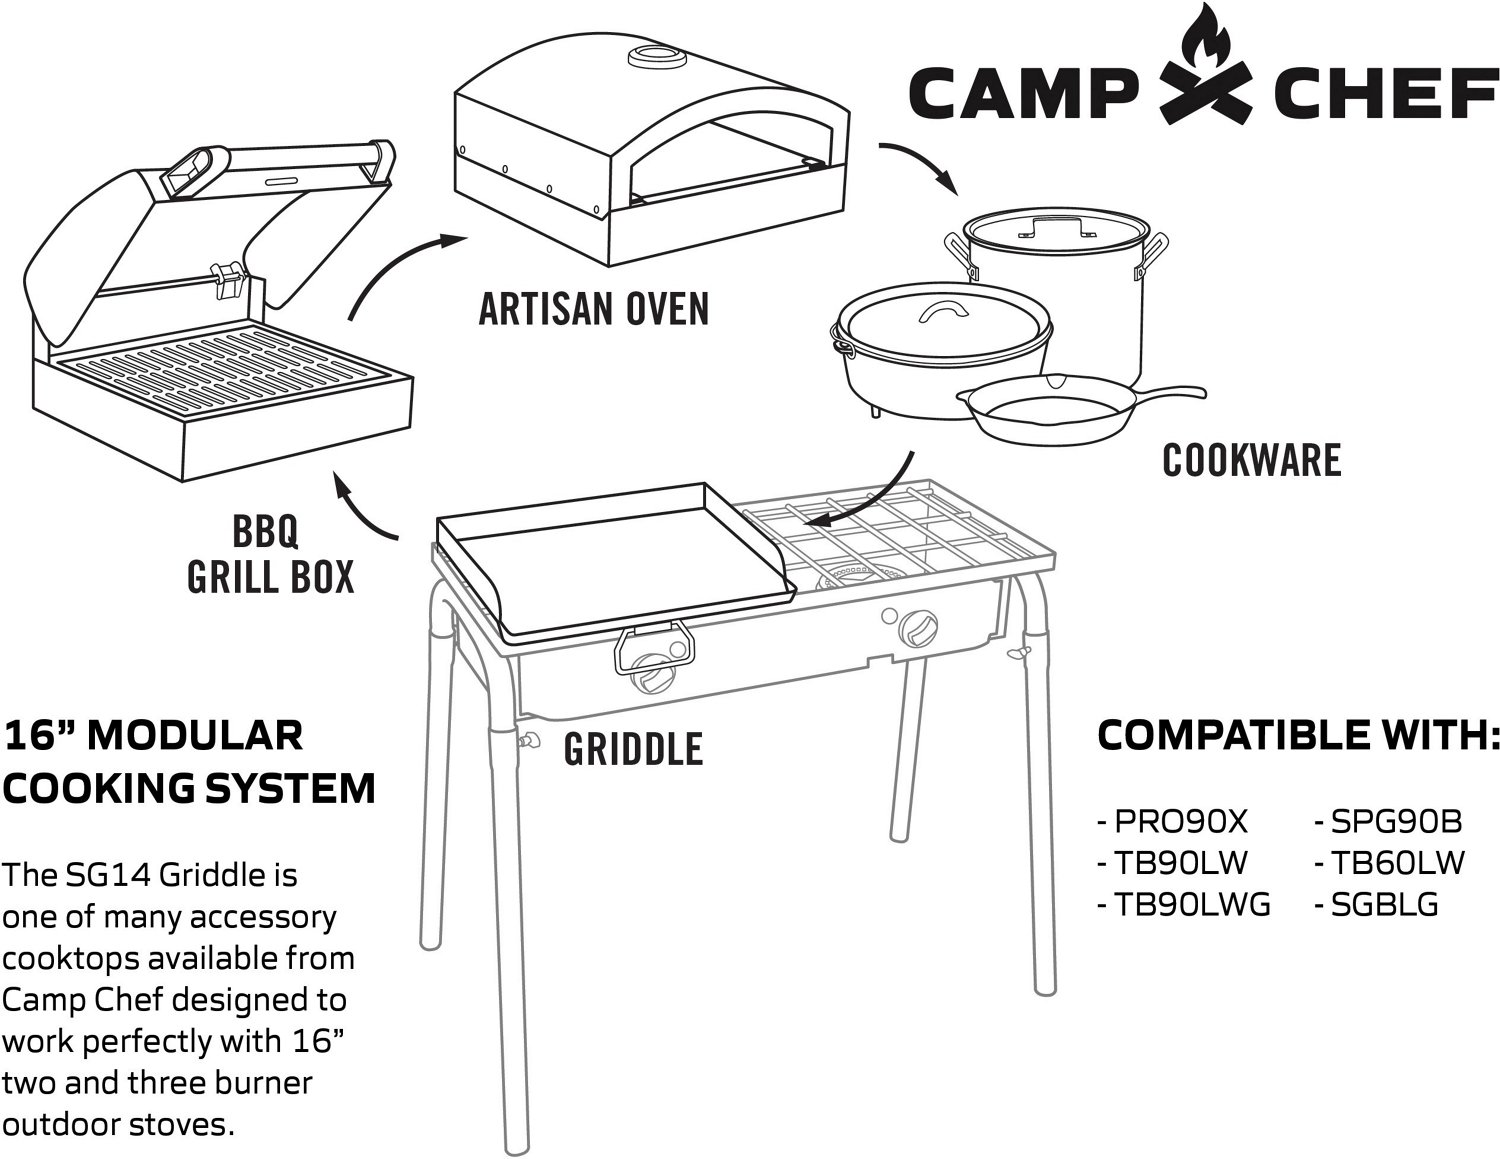 Camp Chef 14 x 16 Professional Flat Top Griddle - St. Louis BBQ Store